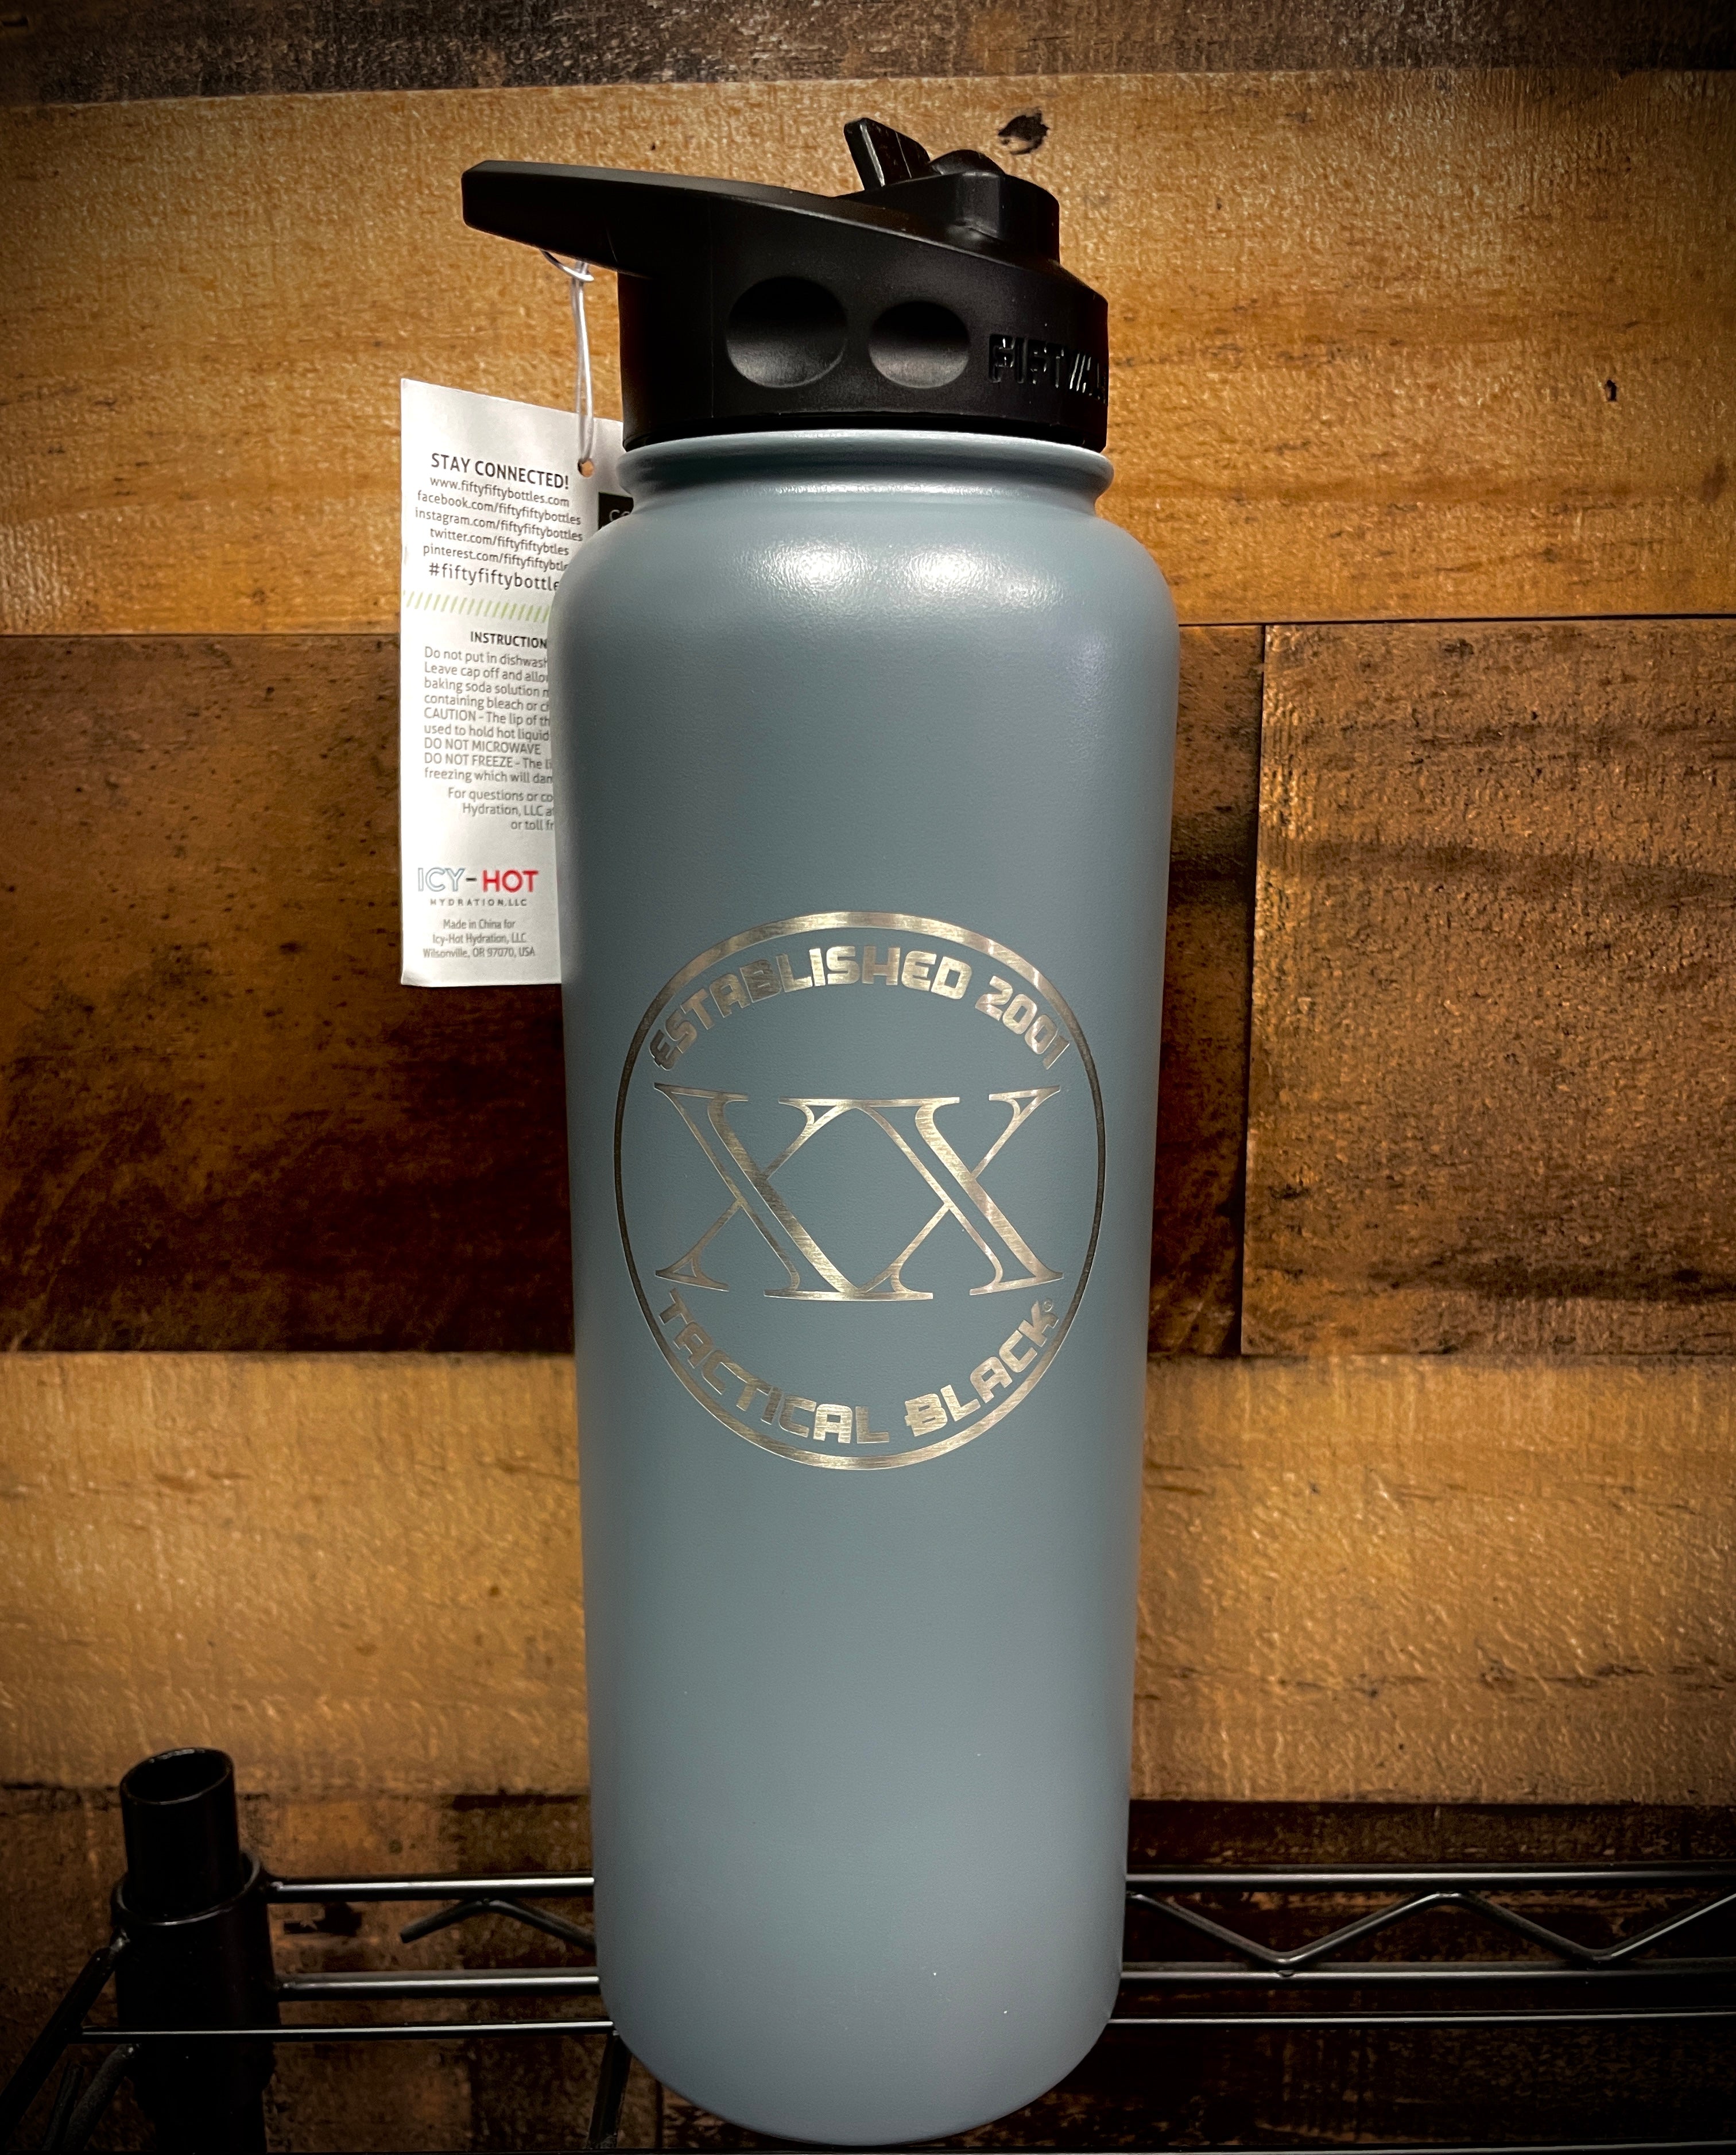 Limited Edition 20th Anniversary Tactical Black Water Bottle